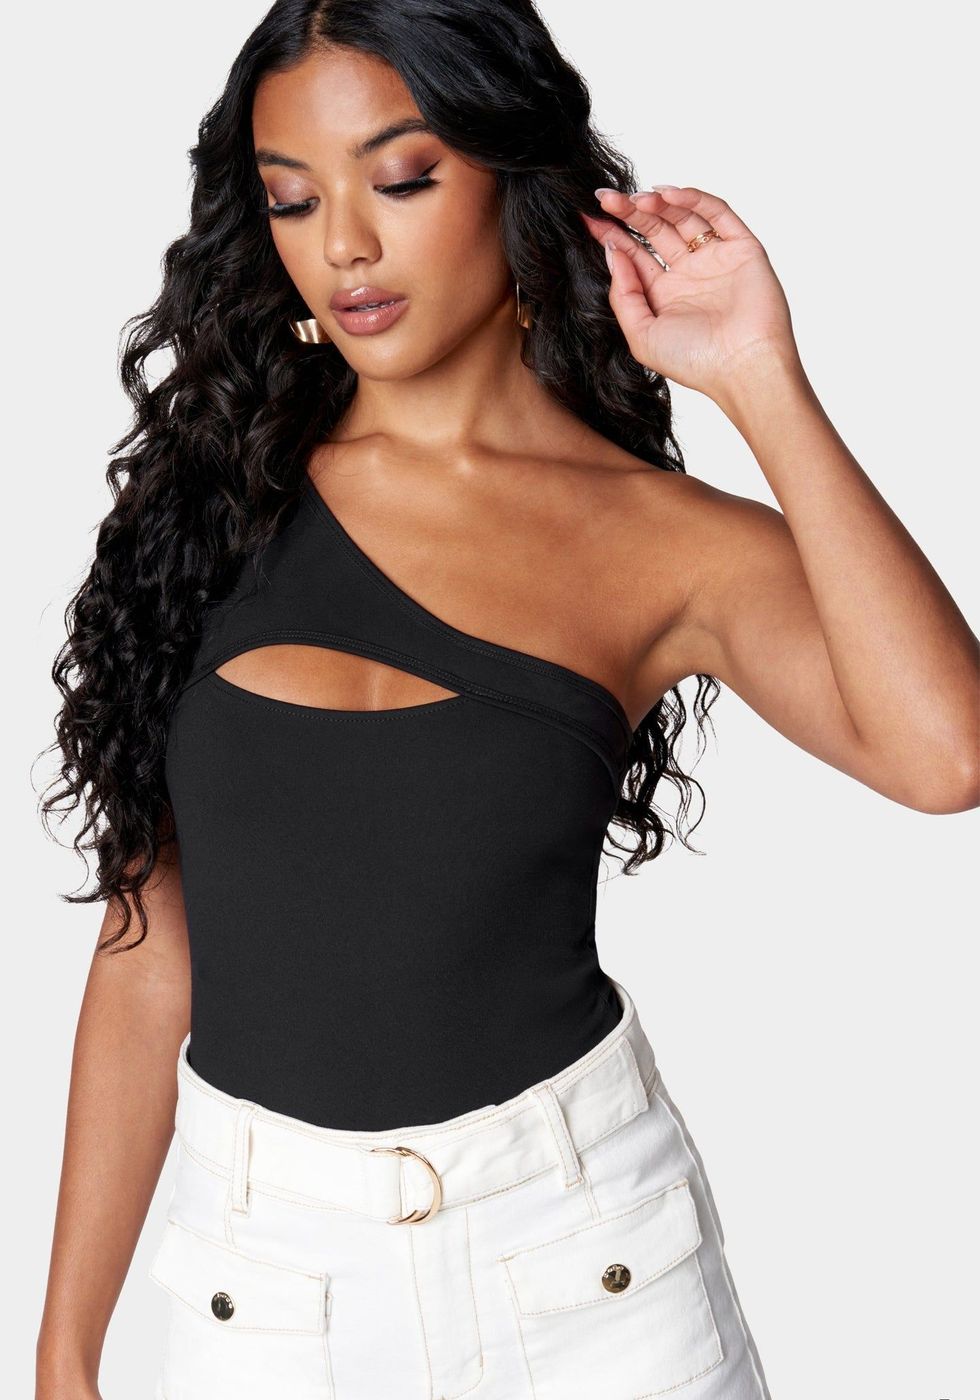 10 Online Shops Like boohoo For Cute and Cheap Clothes - Society19 UK  Cheap  womens clothing websites, Online shopping sites clothes, Cheap clothes  online